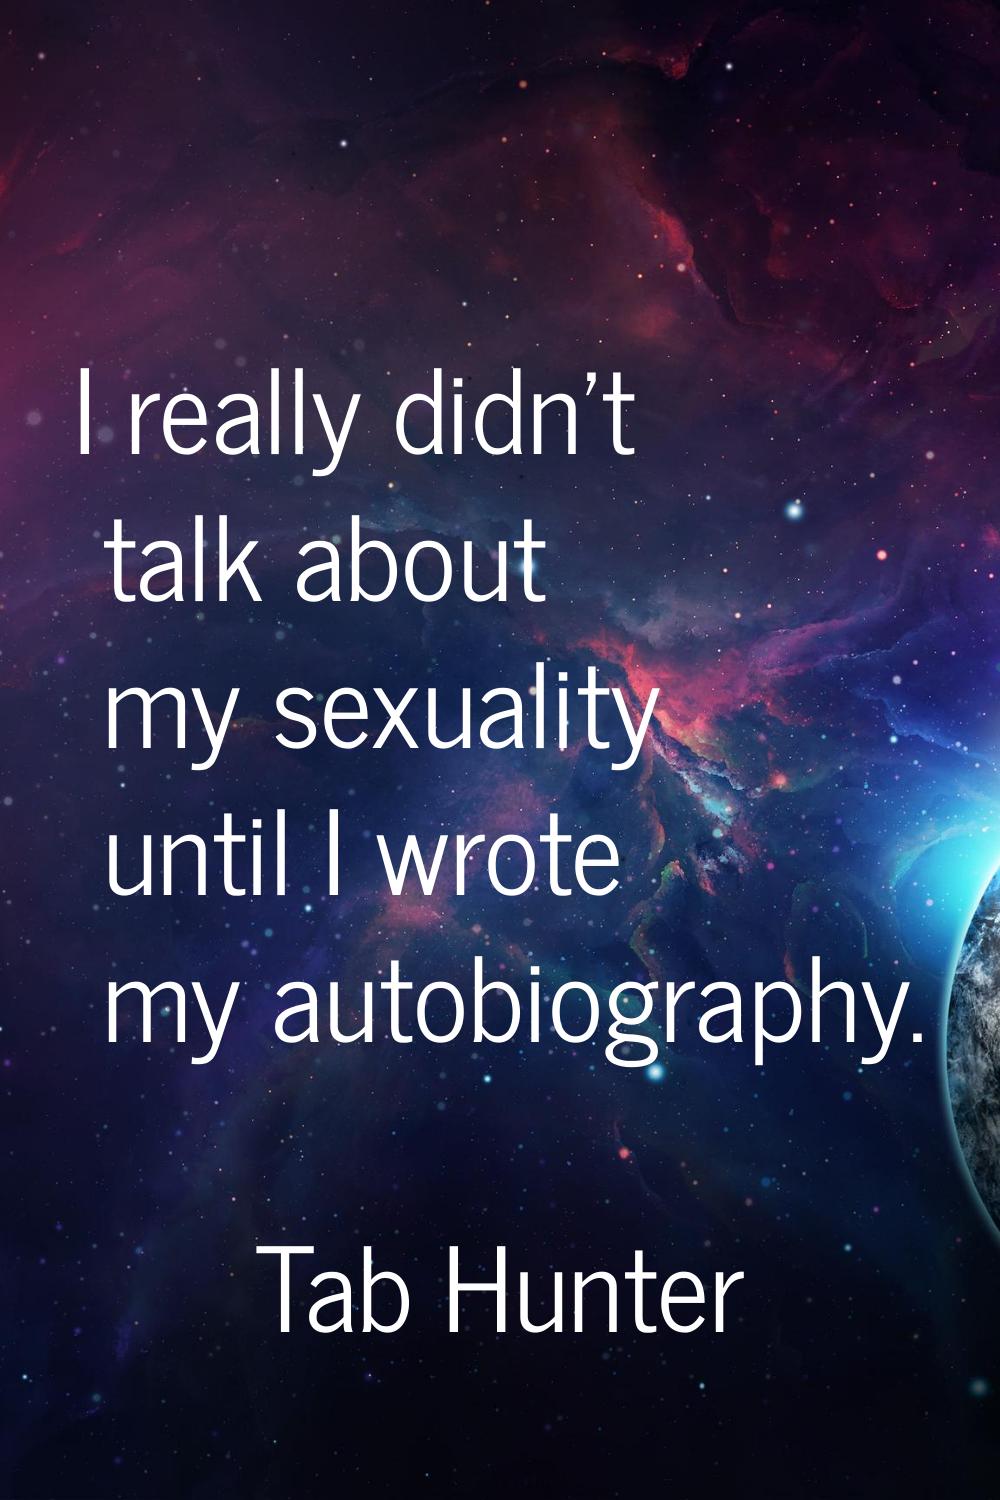 I really didn't talk about my sexuality until I wrote my autobiography.